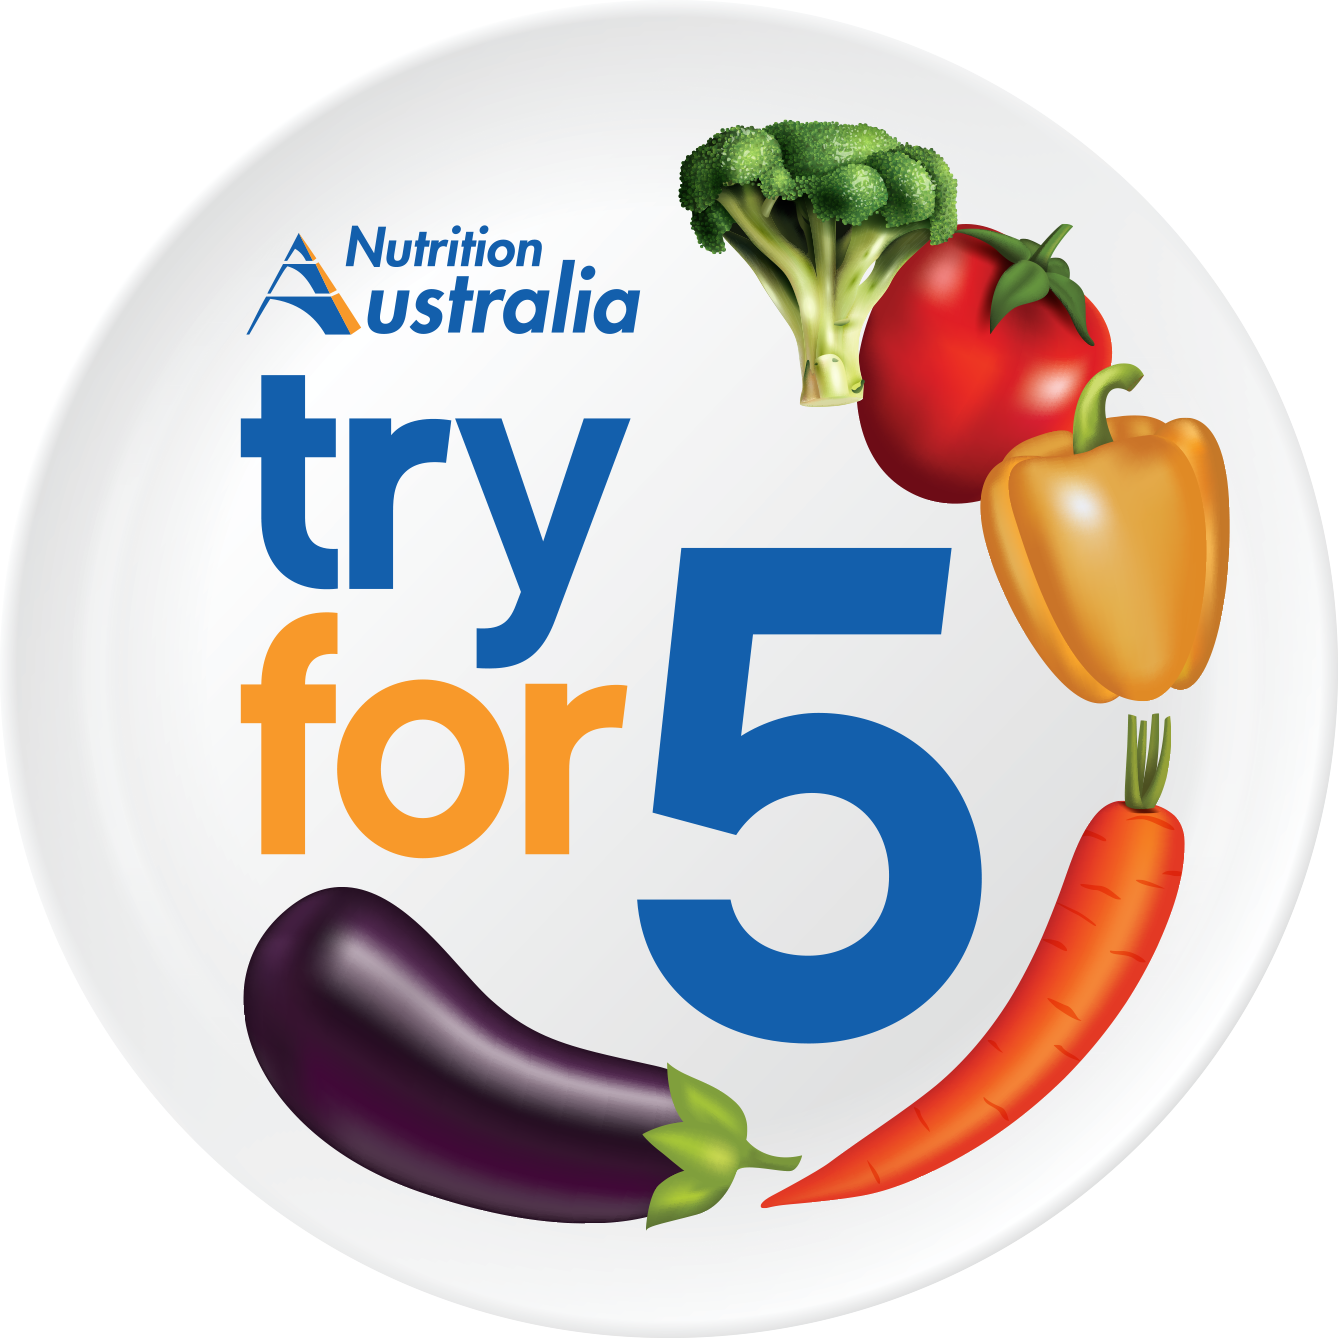 To inspire and empower healthy eating for all Australians Nutrition